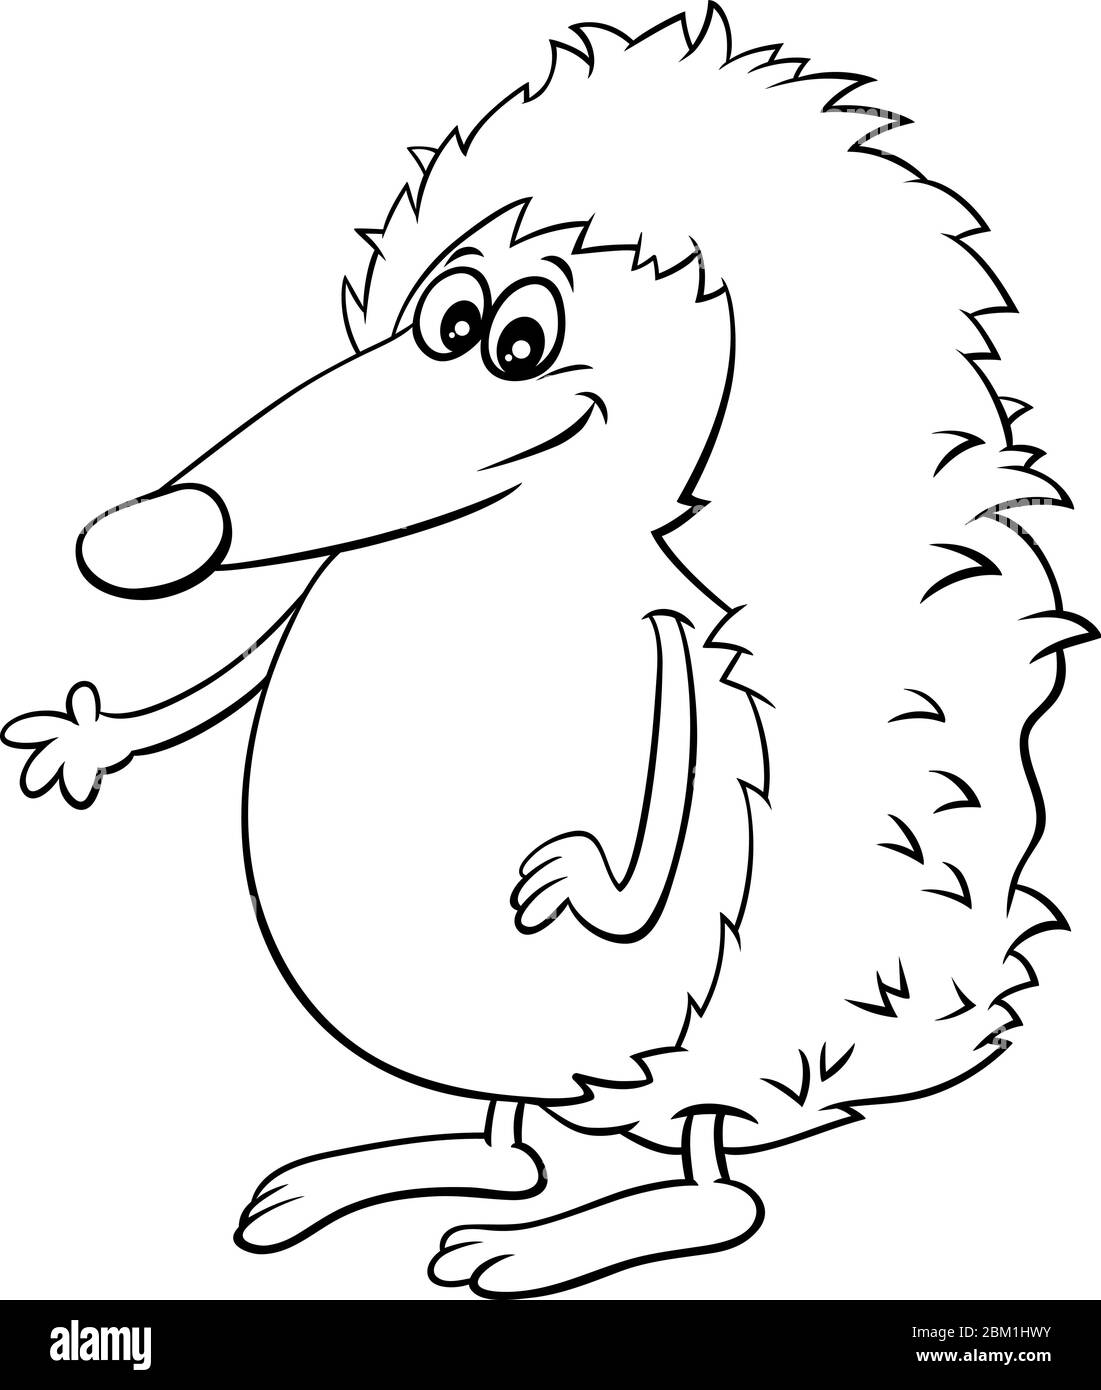 Black and White Cartoon illustration of Comic Hedgehog Wild Animal Character Coloring Book Page Stock Vector